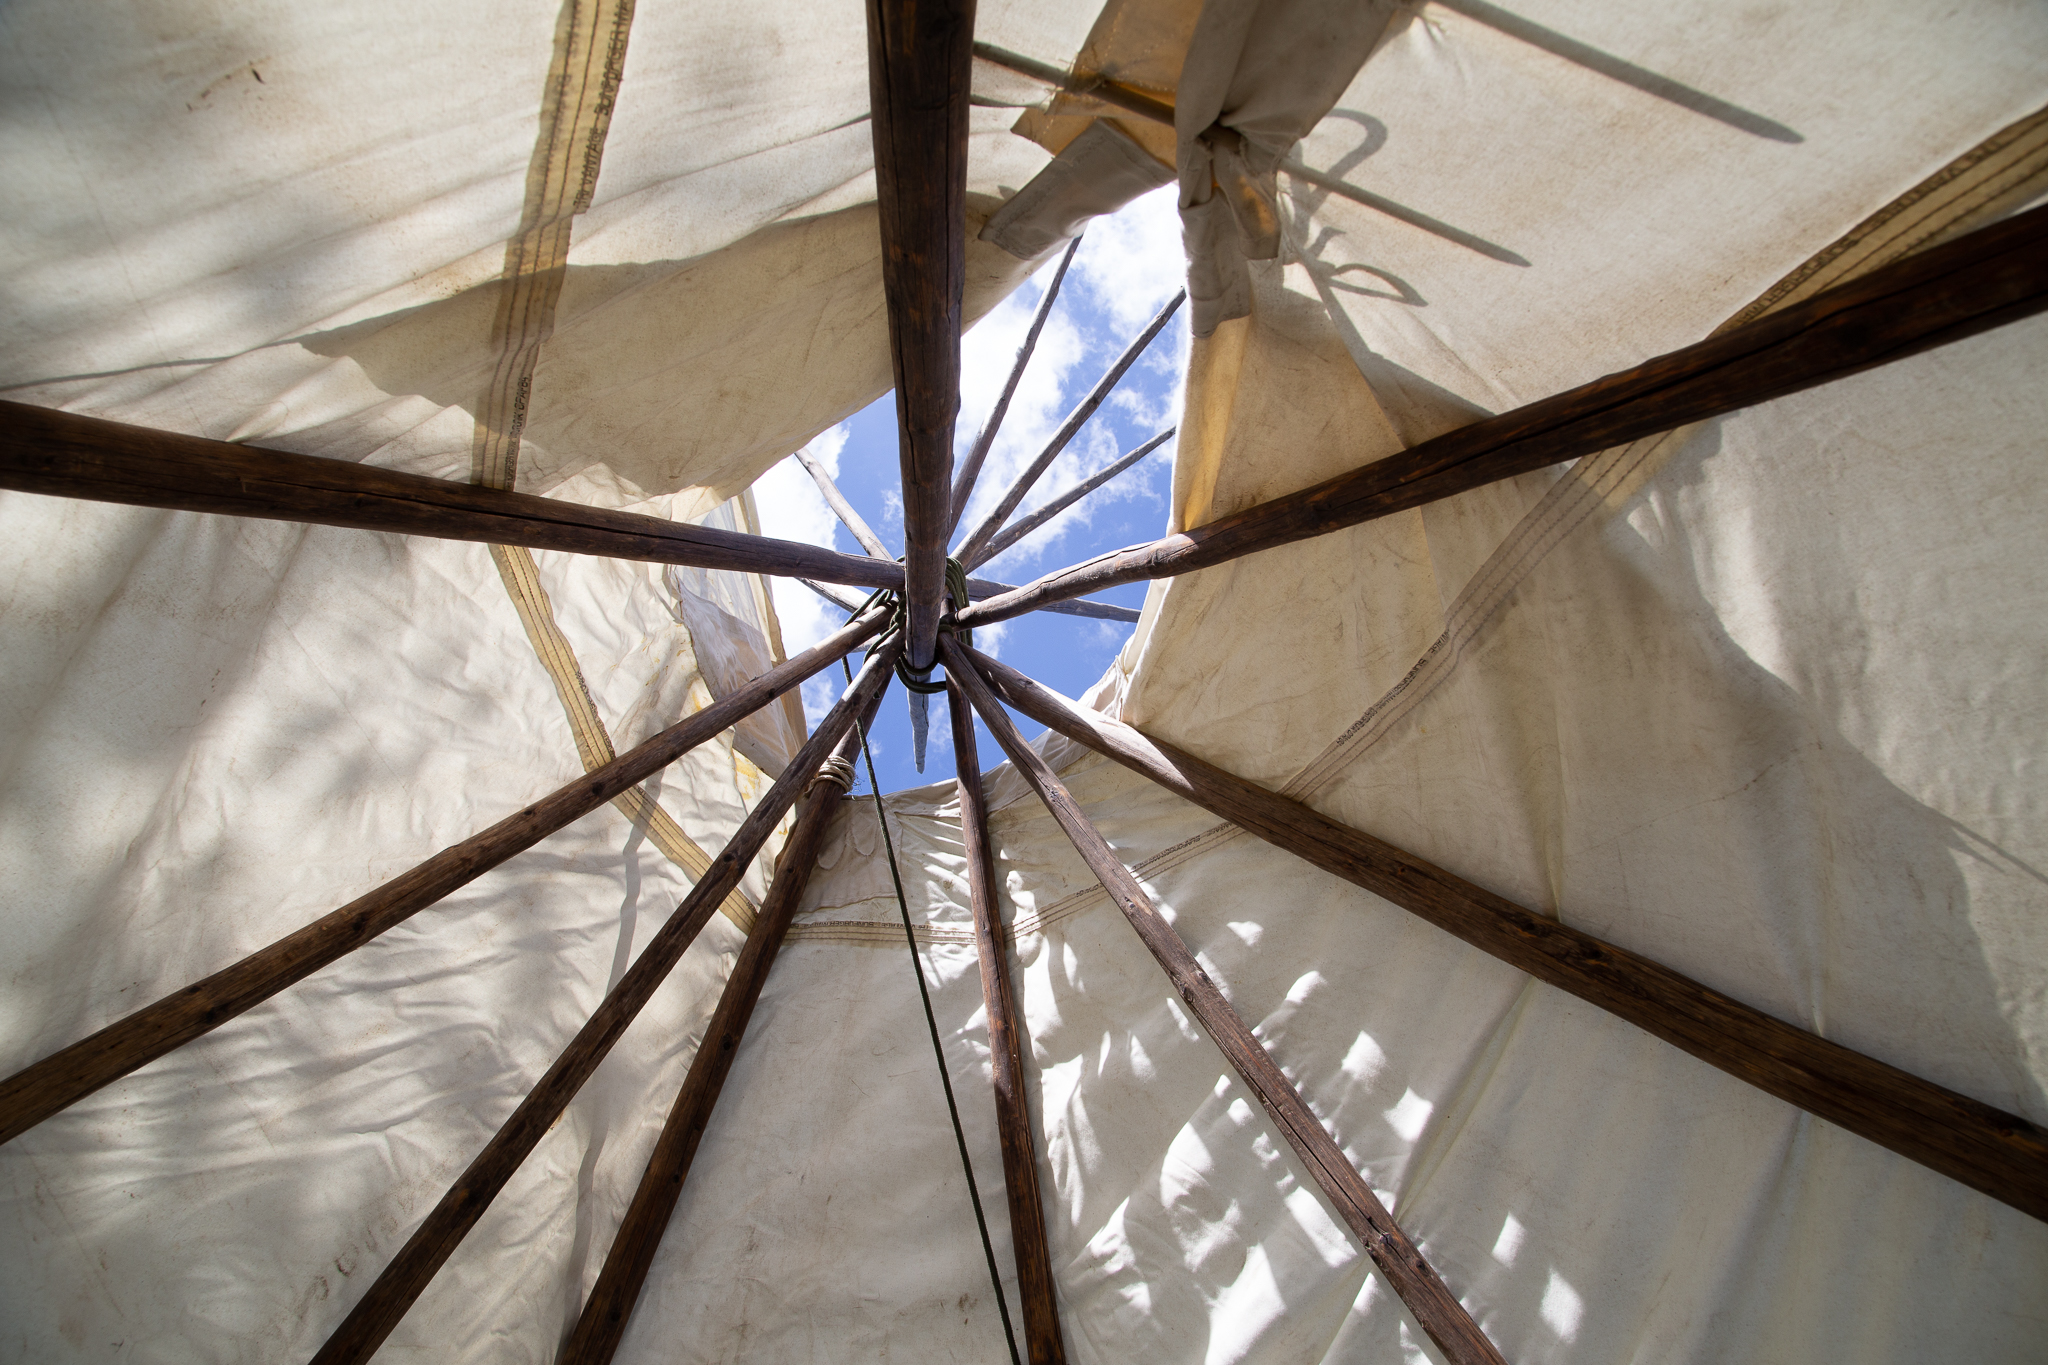 Looking up to the sky inside of a tipi. The wooden poles of the structure converge together and a gap in the white canvas shows the blue sky outside. 